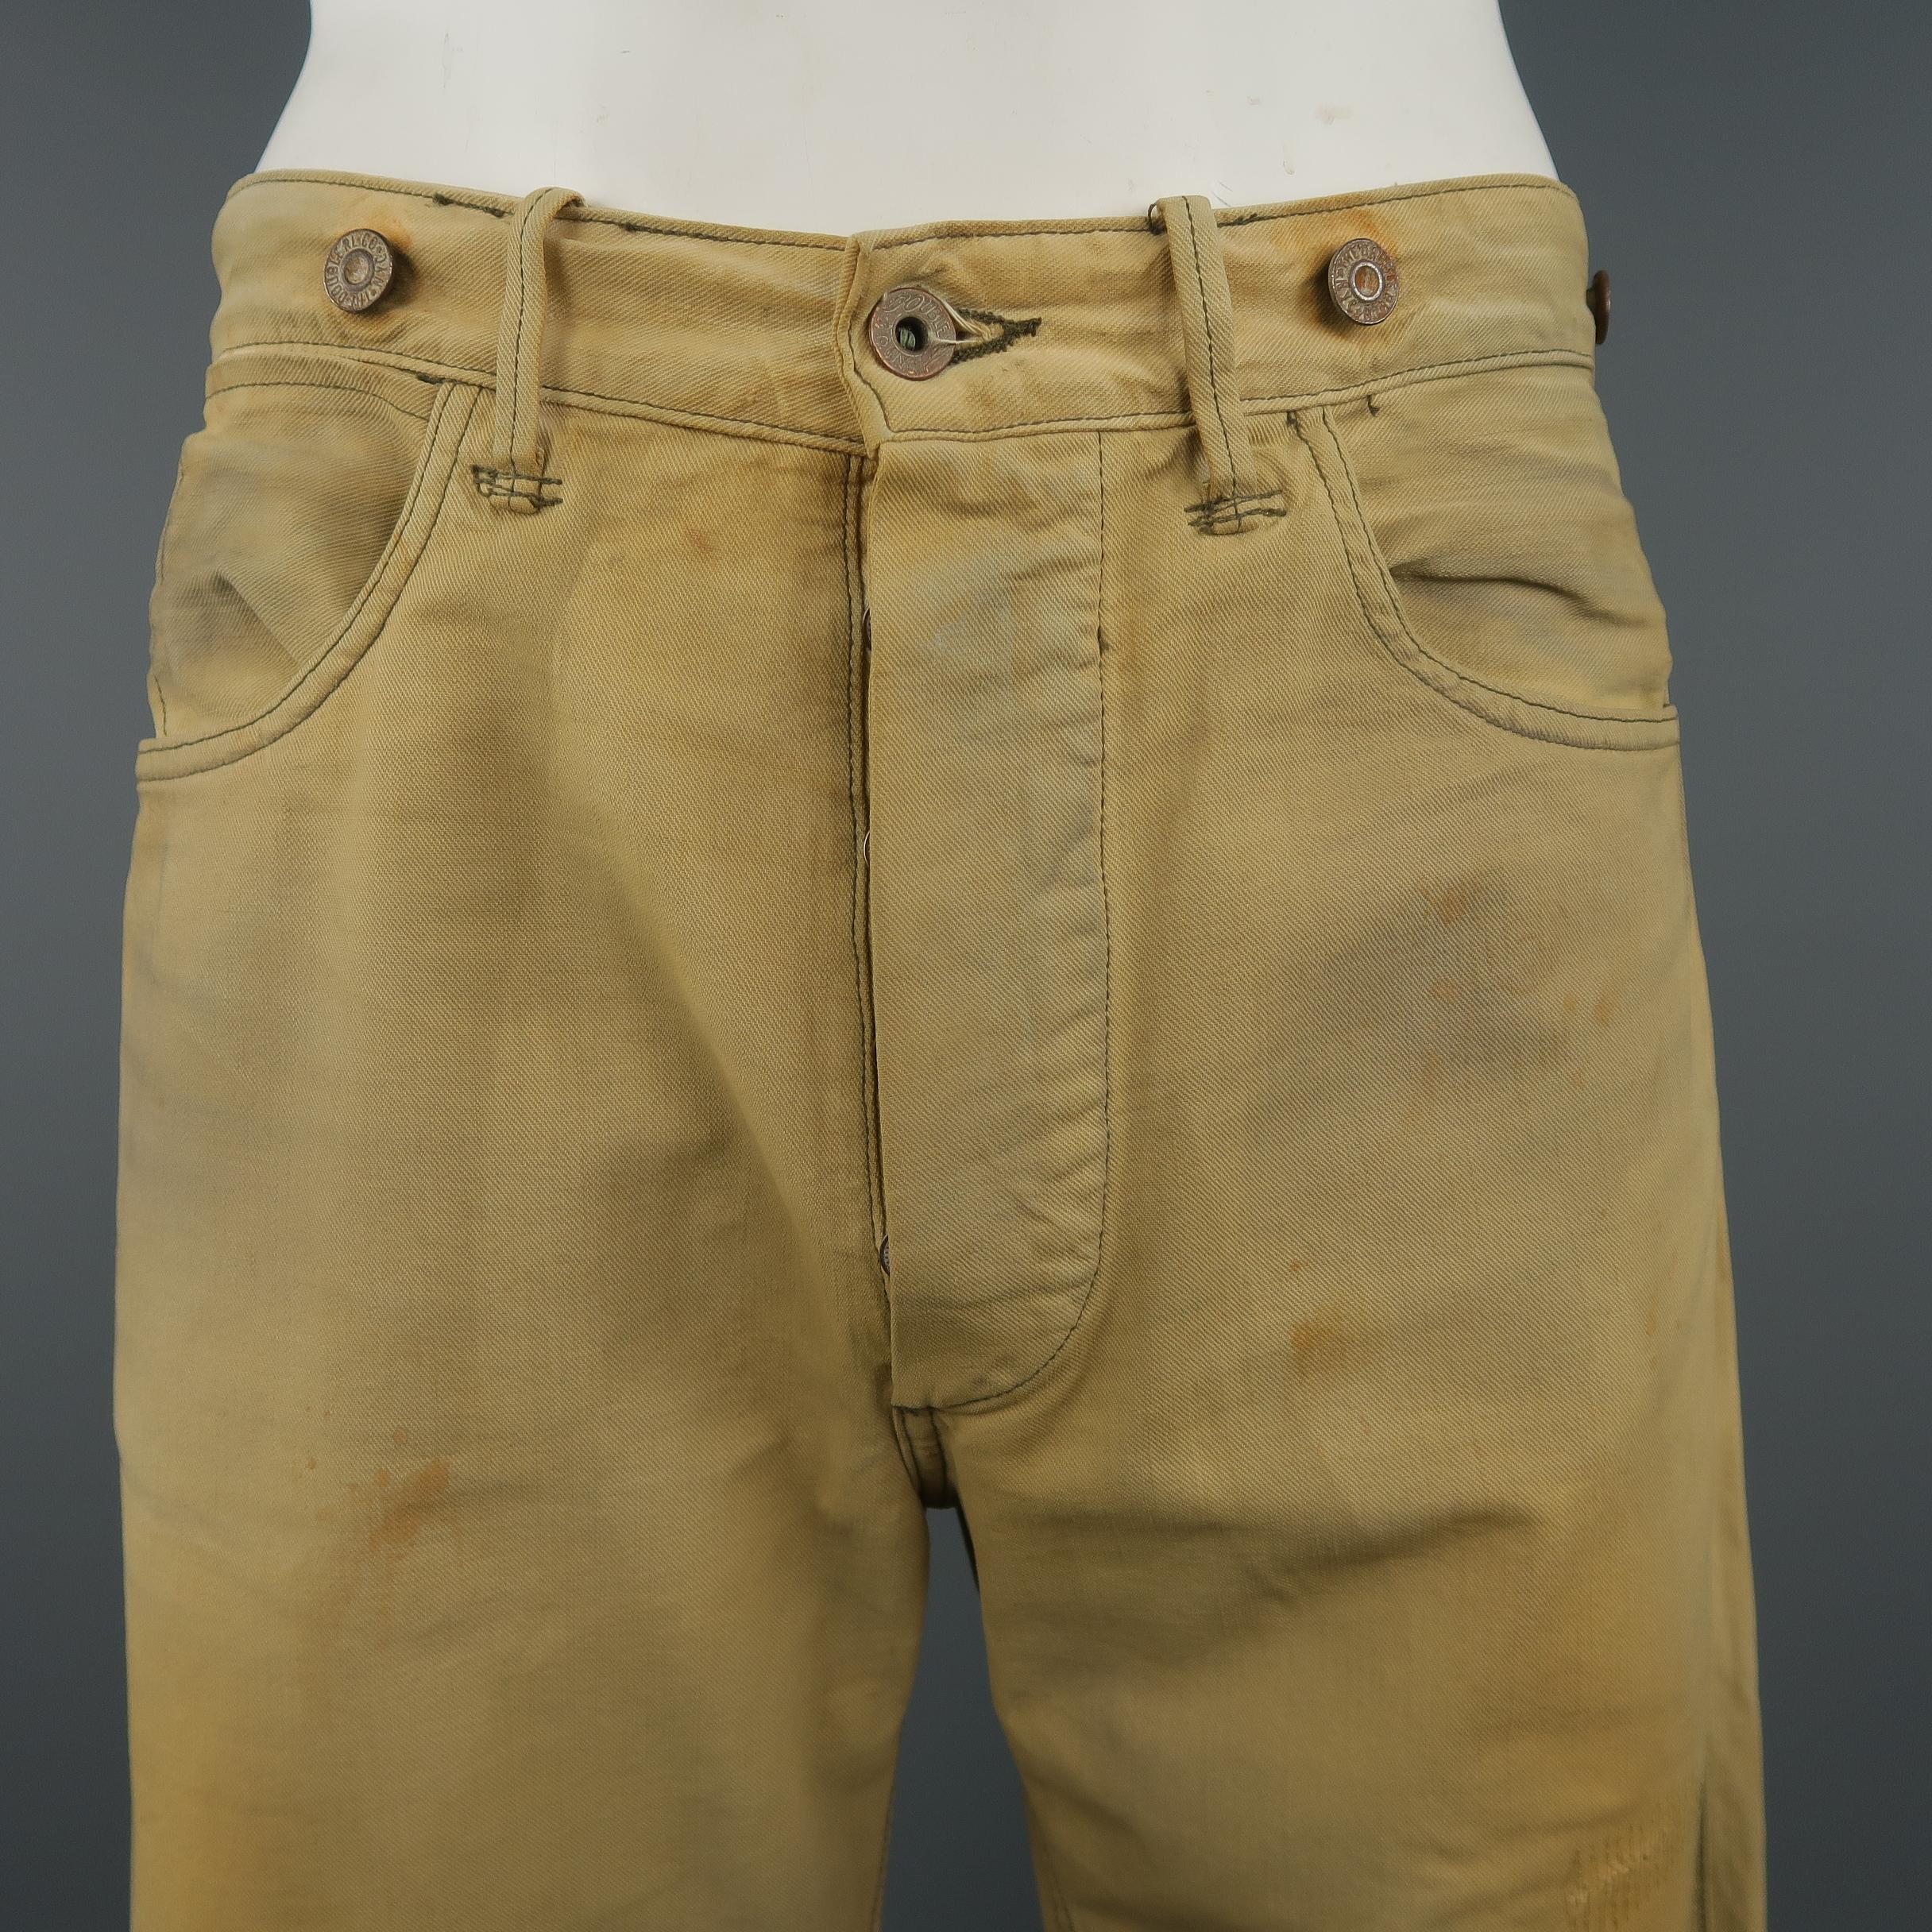 RRL by RALPH LAUREN jeans comes in dirty washed khaki beige denim with all over distressing and embroidery, button fly, back belt, and suspender brace buttons. Made '93. Made in USA. Retail price $490.00
 
Excellent Pre-Owned Condition.
Marked: